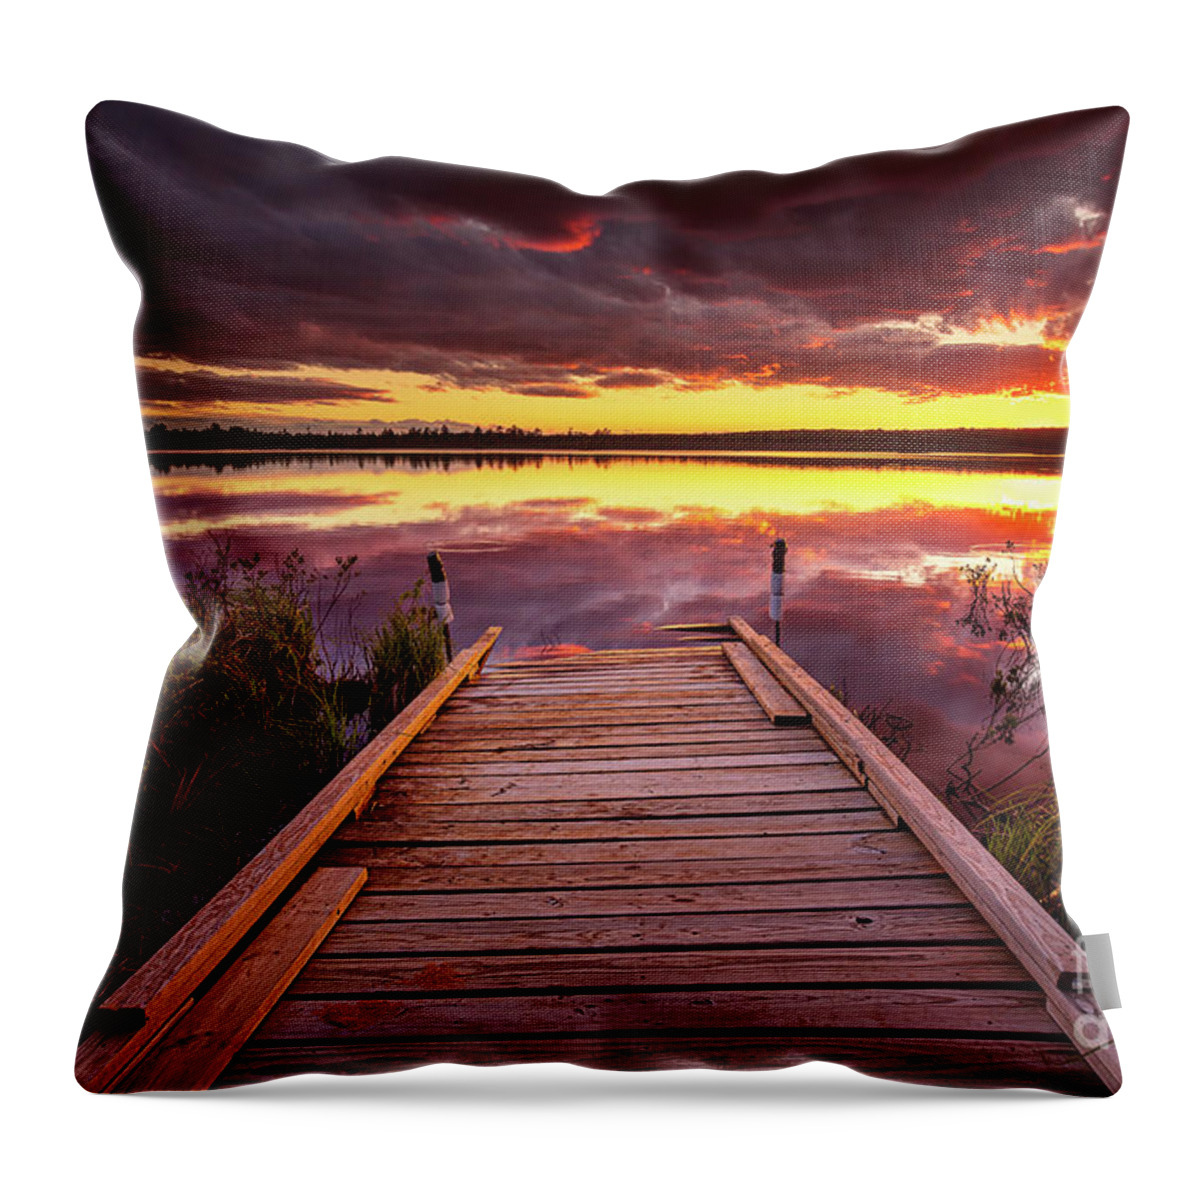 Andrew Slater Photography Throw Pillow featuring the photograph Lagoon Reflection by Andrew Slater